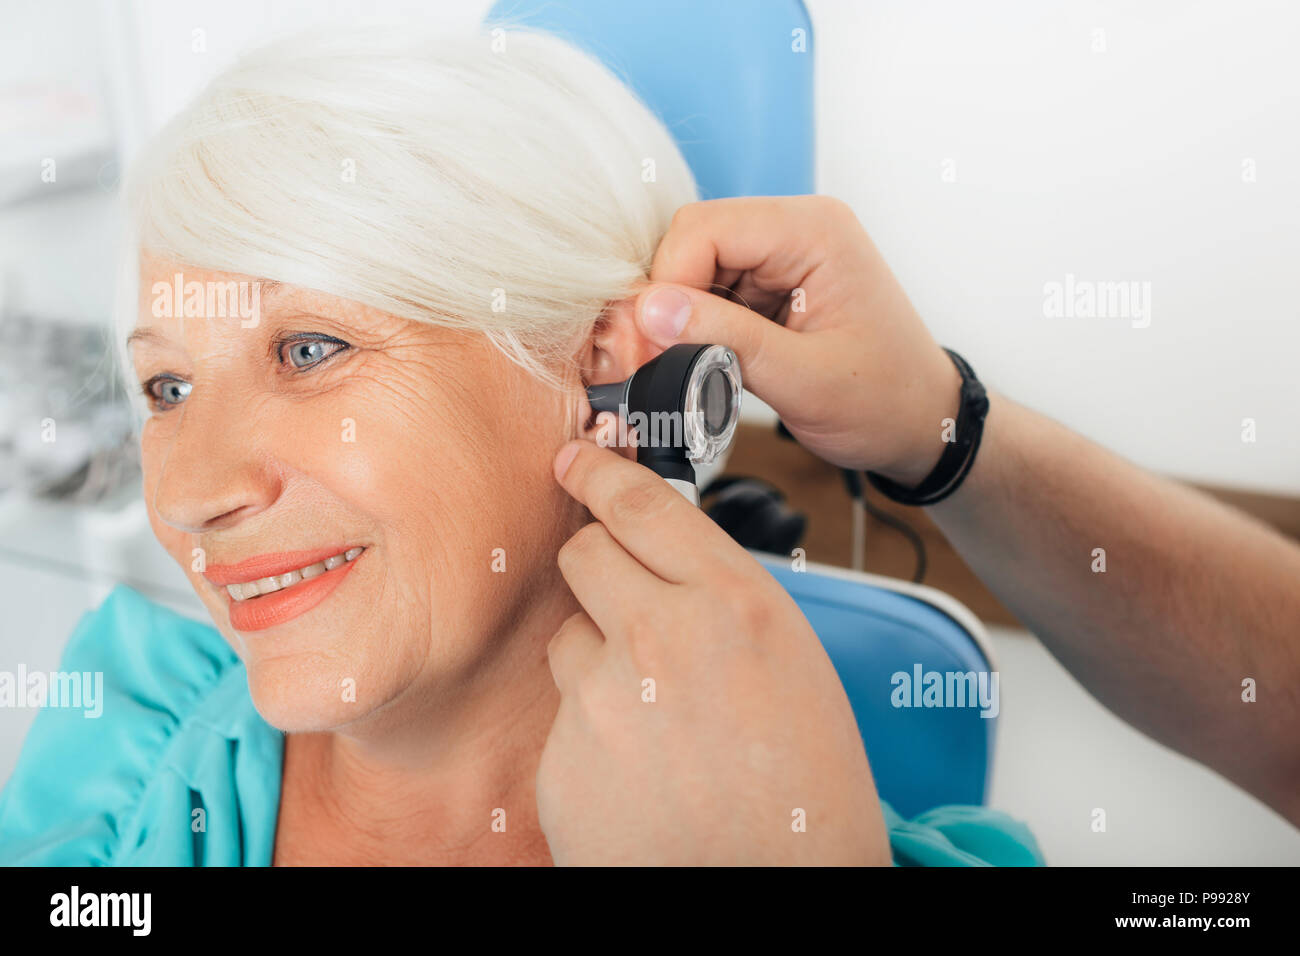 Elderly patient during an ear examination Stock Photo